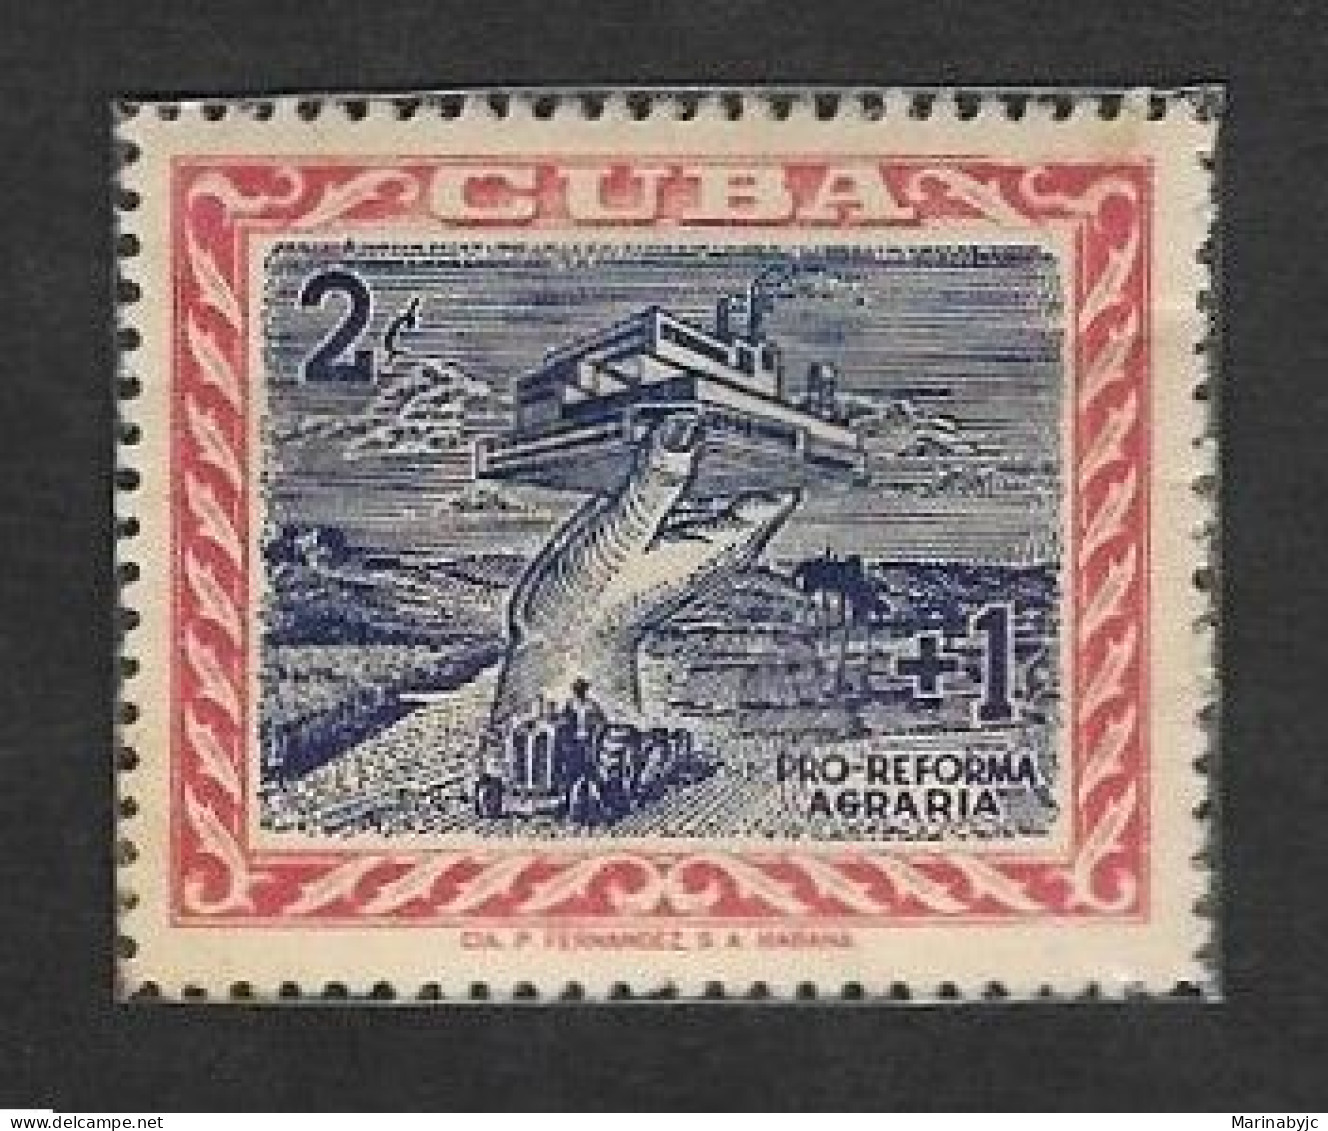 SE)1959 CUBA, THE CUBAN REVOLUTION, AGRICULTURAL REFORM, MNH - Used Stamps